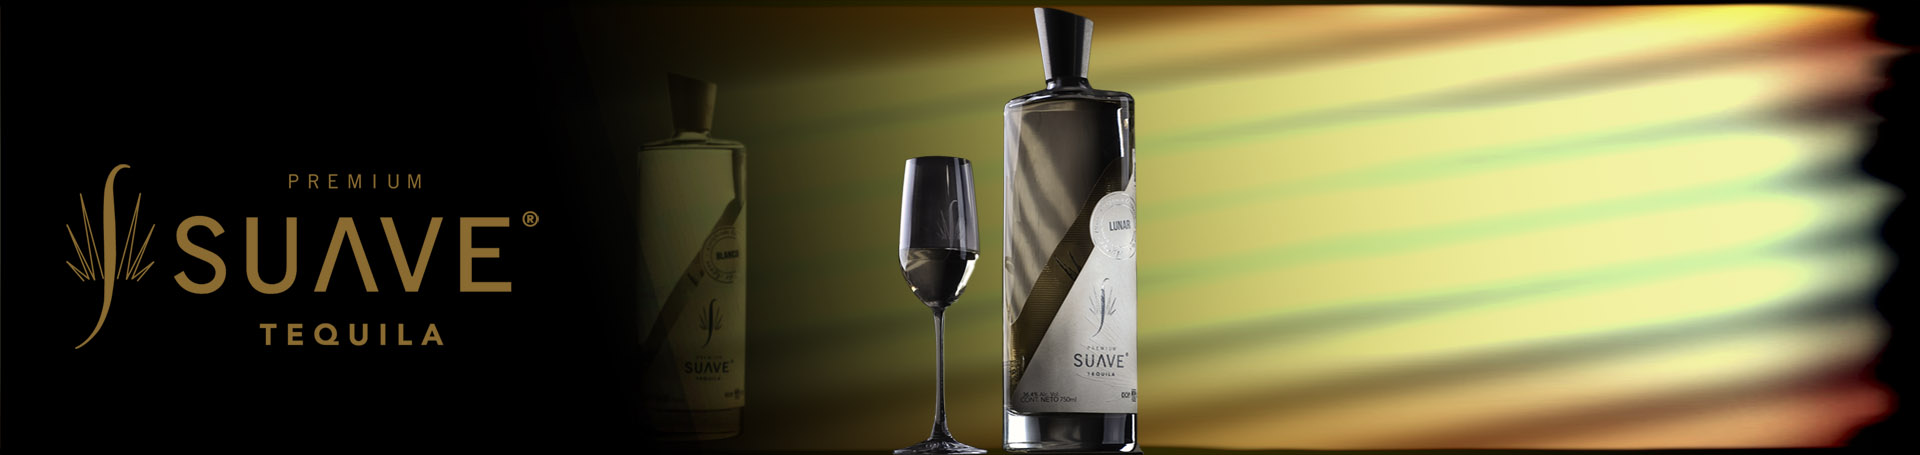 Suave Tequila bottles